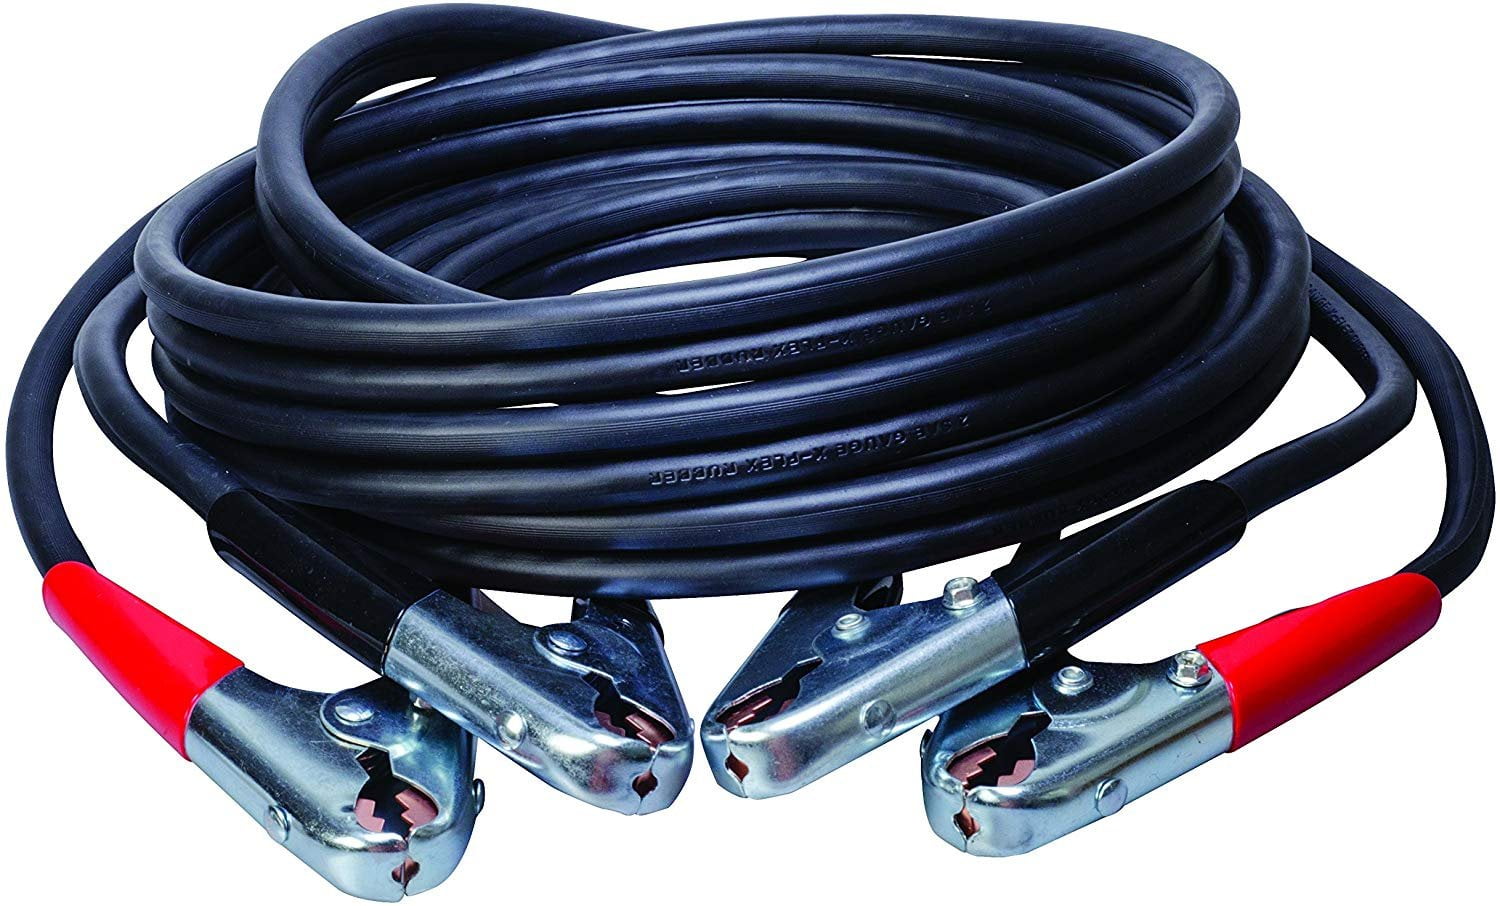 New 25ft 2 GA Booster Jumper Cables Auto Car Jumping Cables Heavy Duty Gauge Set 